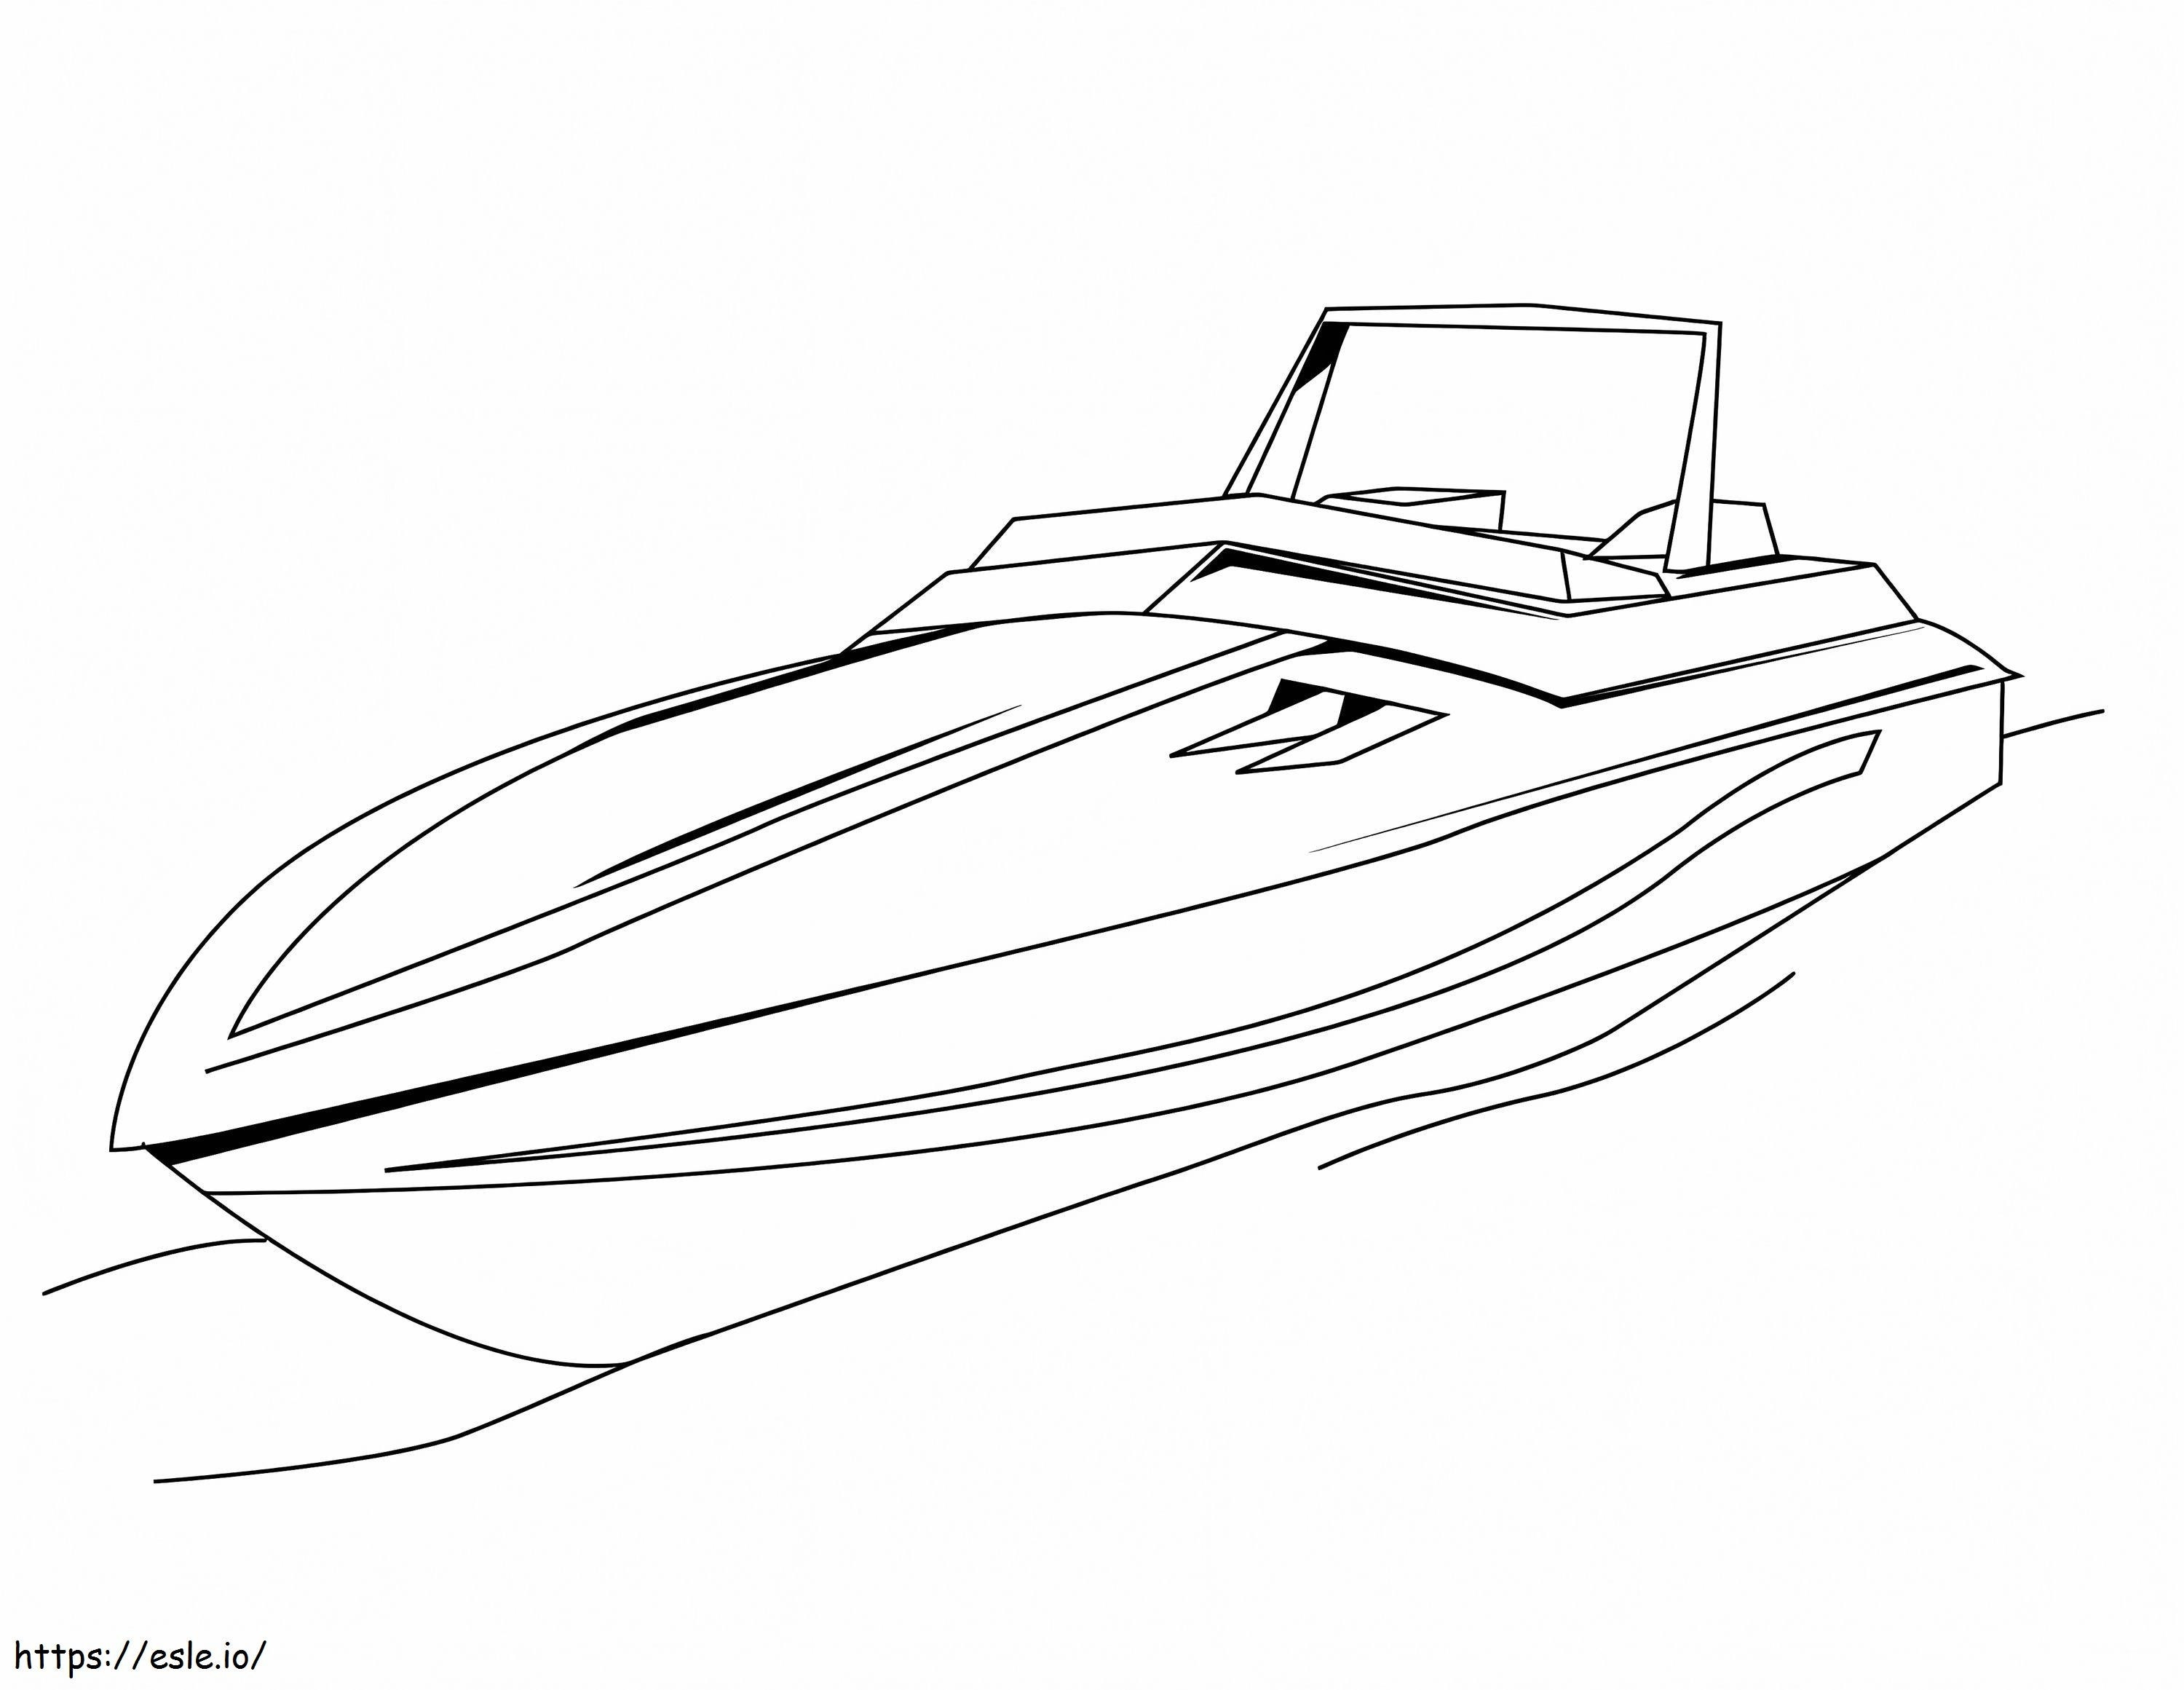 A Speedboat coloring page